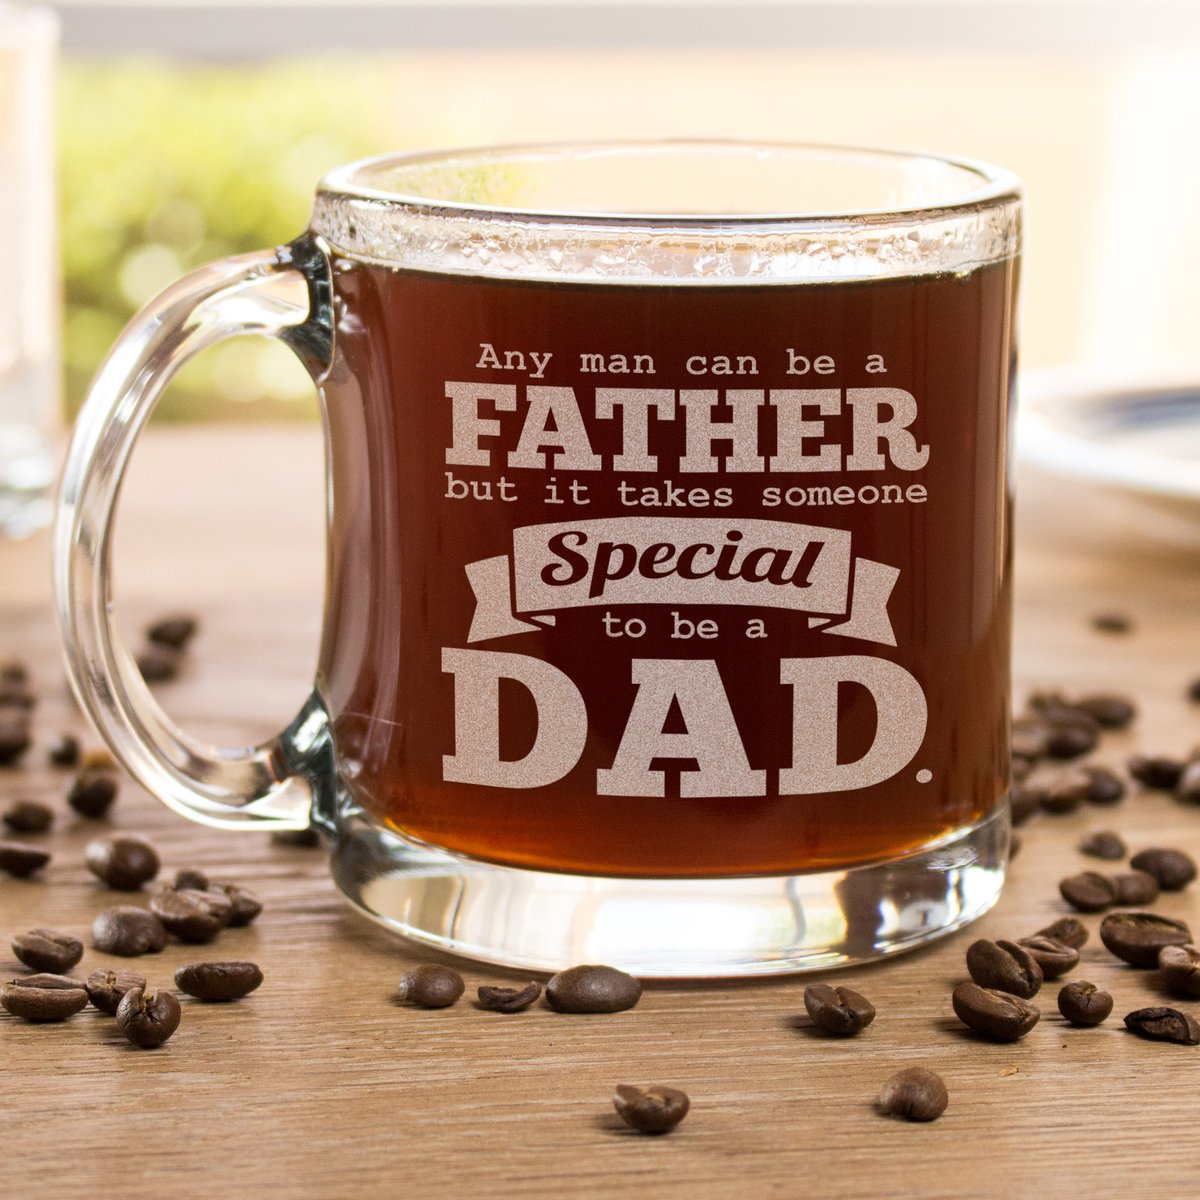 Father’s Day Ideas That Will Make You His Favorite